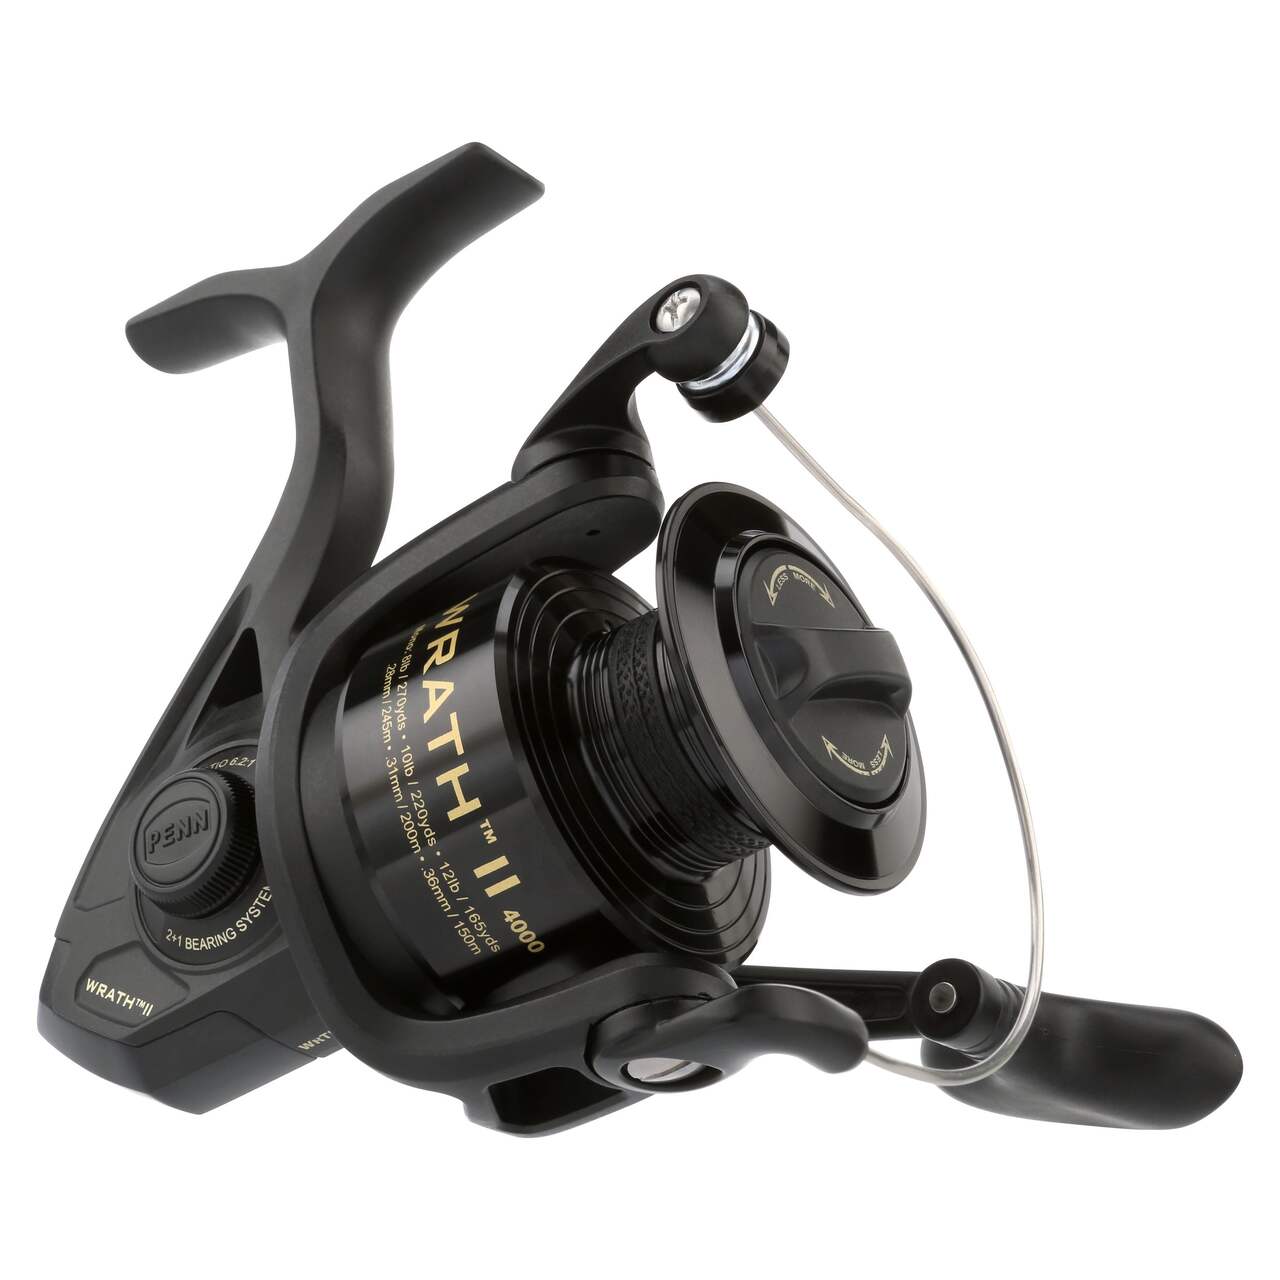 Penn Pursuit II 8000 Fishing Reel - How to take apart, service and